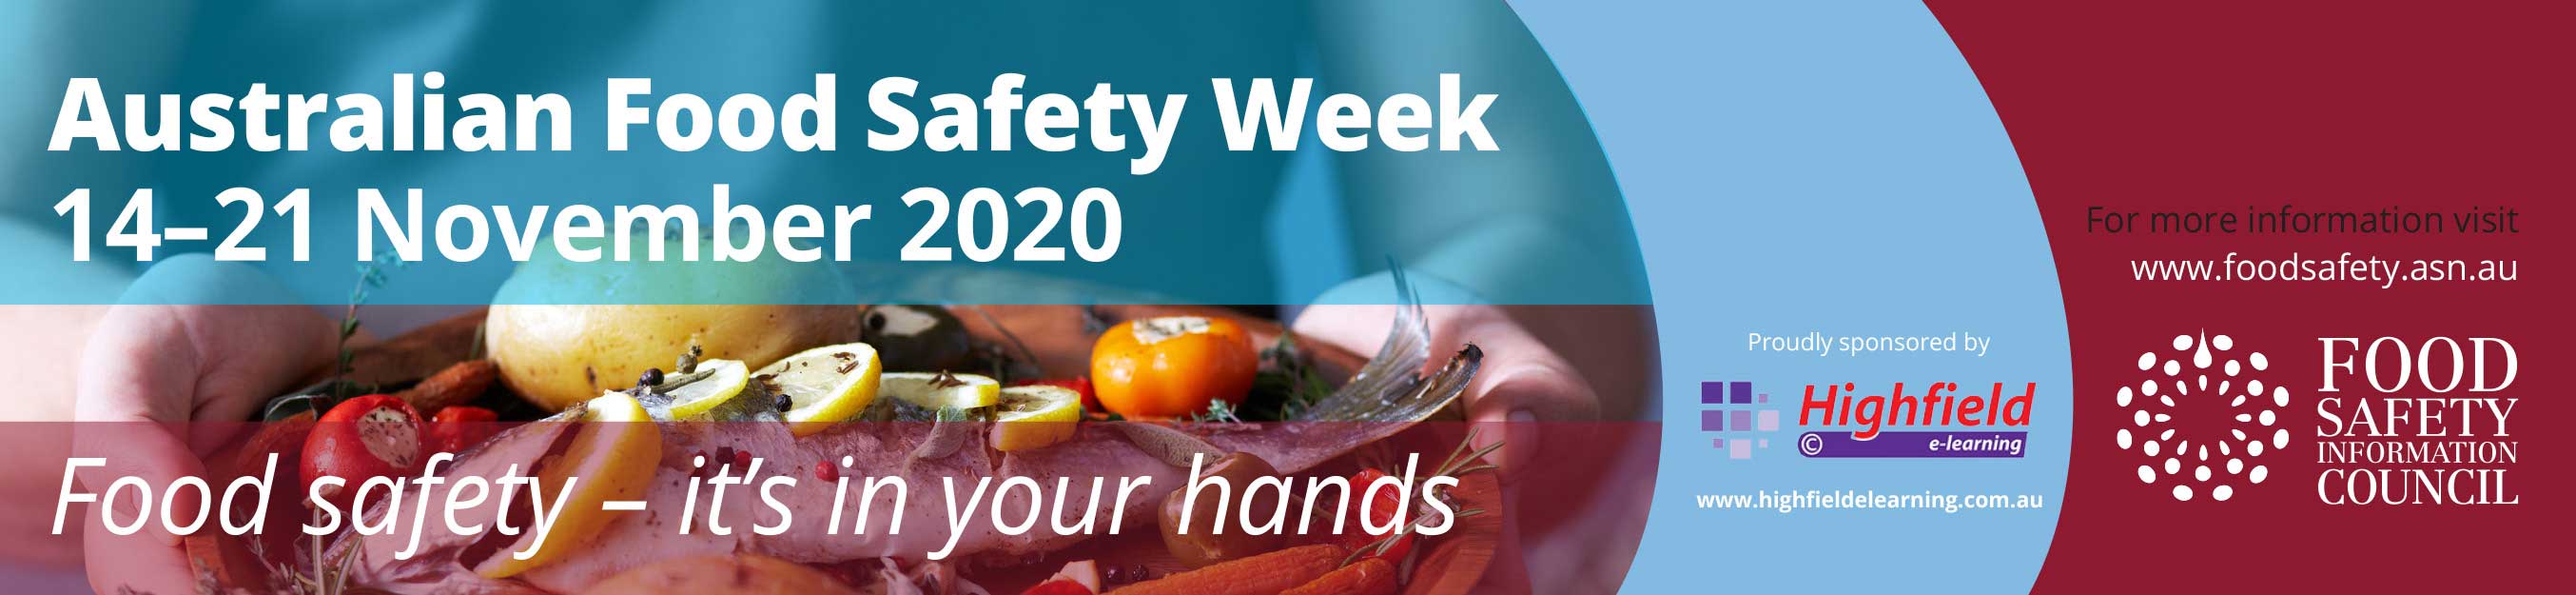 Food Safety Information Council - Safety Week banner 2020